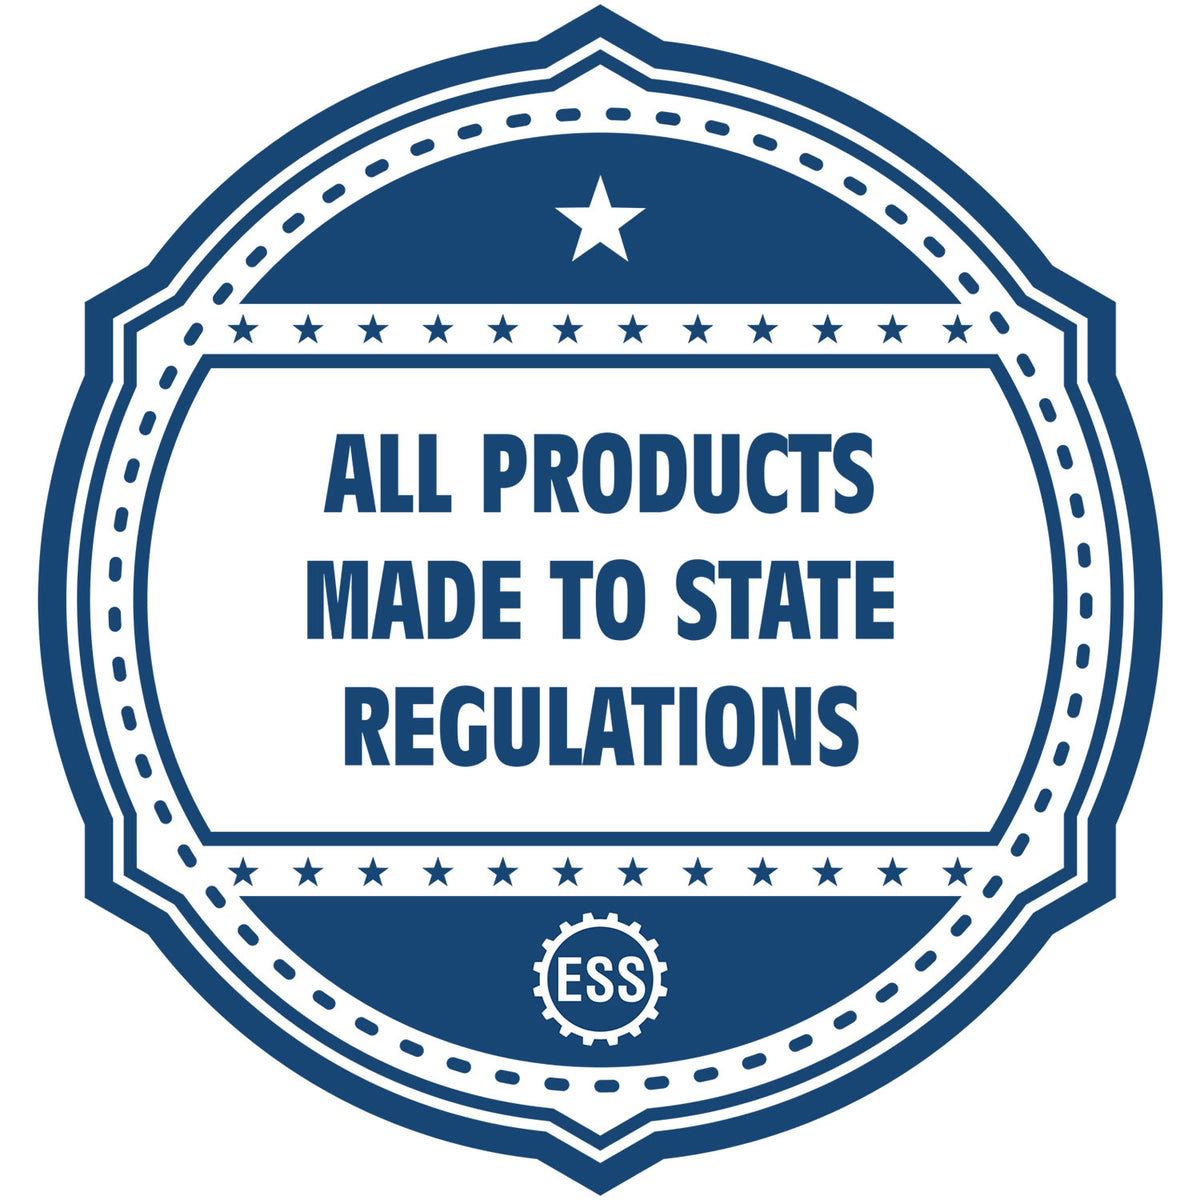 A blue icon or badge for the Soft Texas Professional Geologist Seal showing that this product is made in compliance with state regulations.